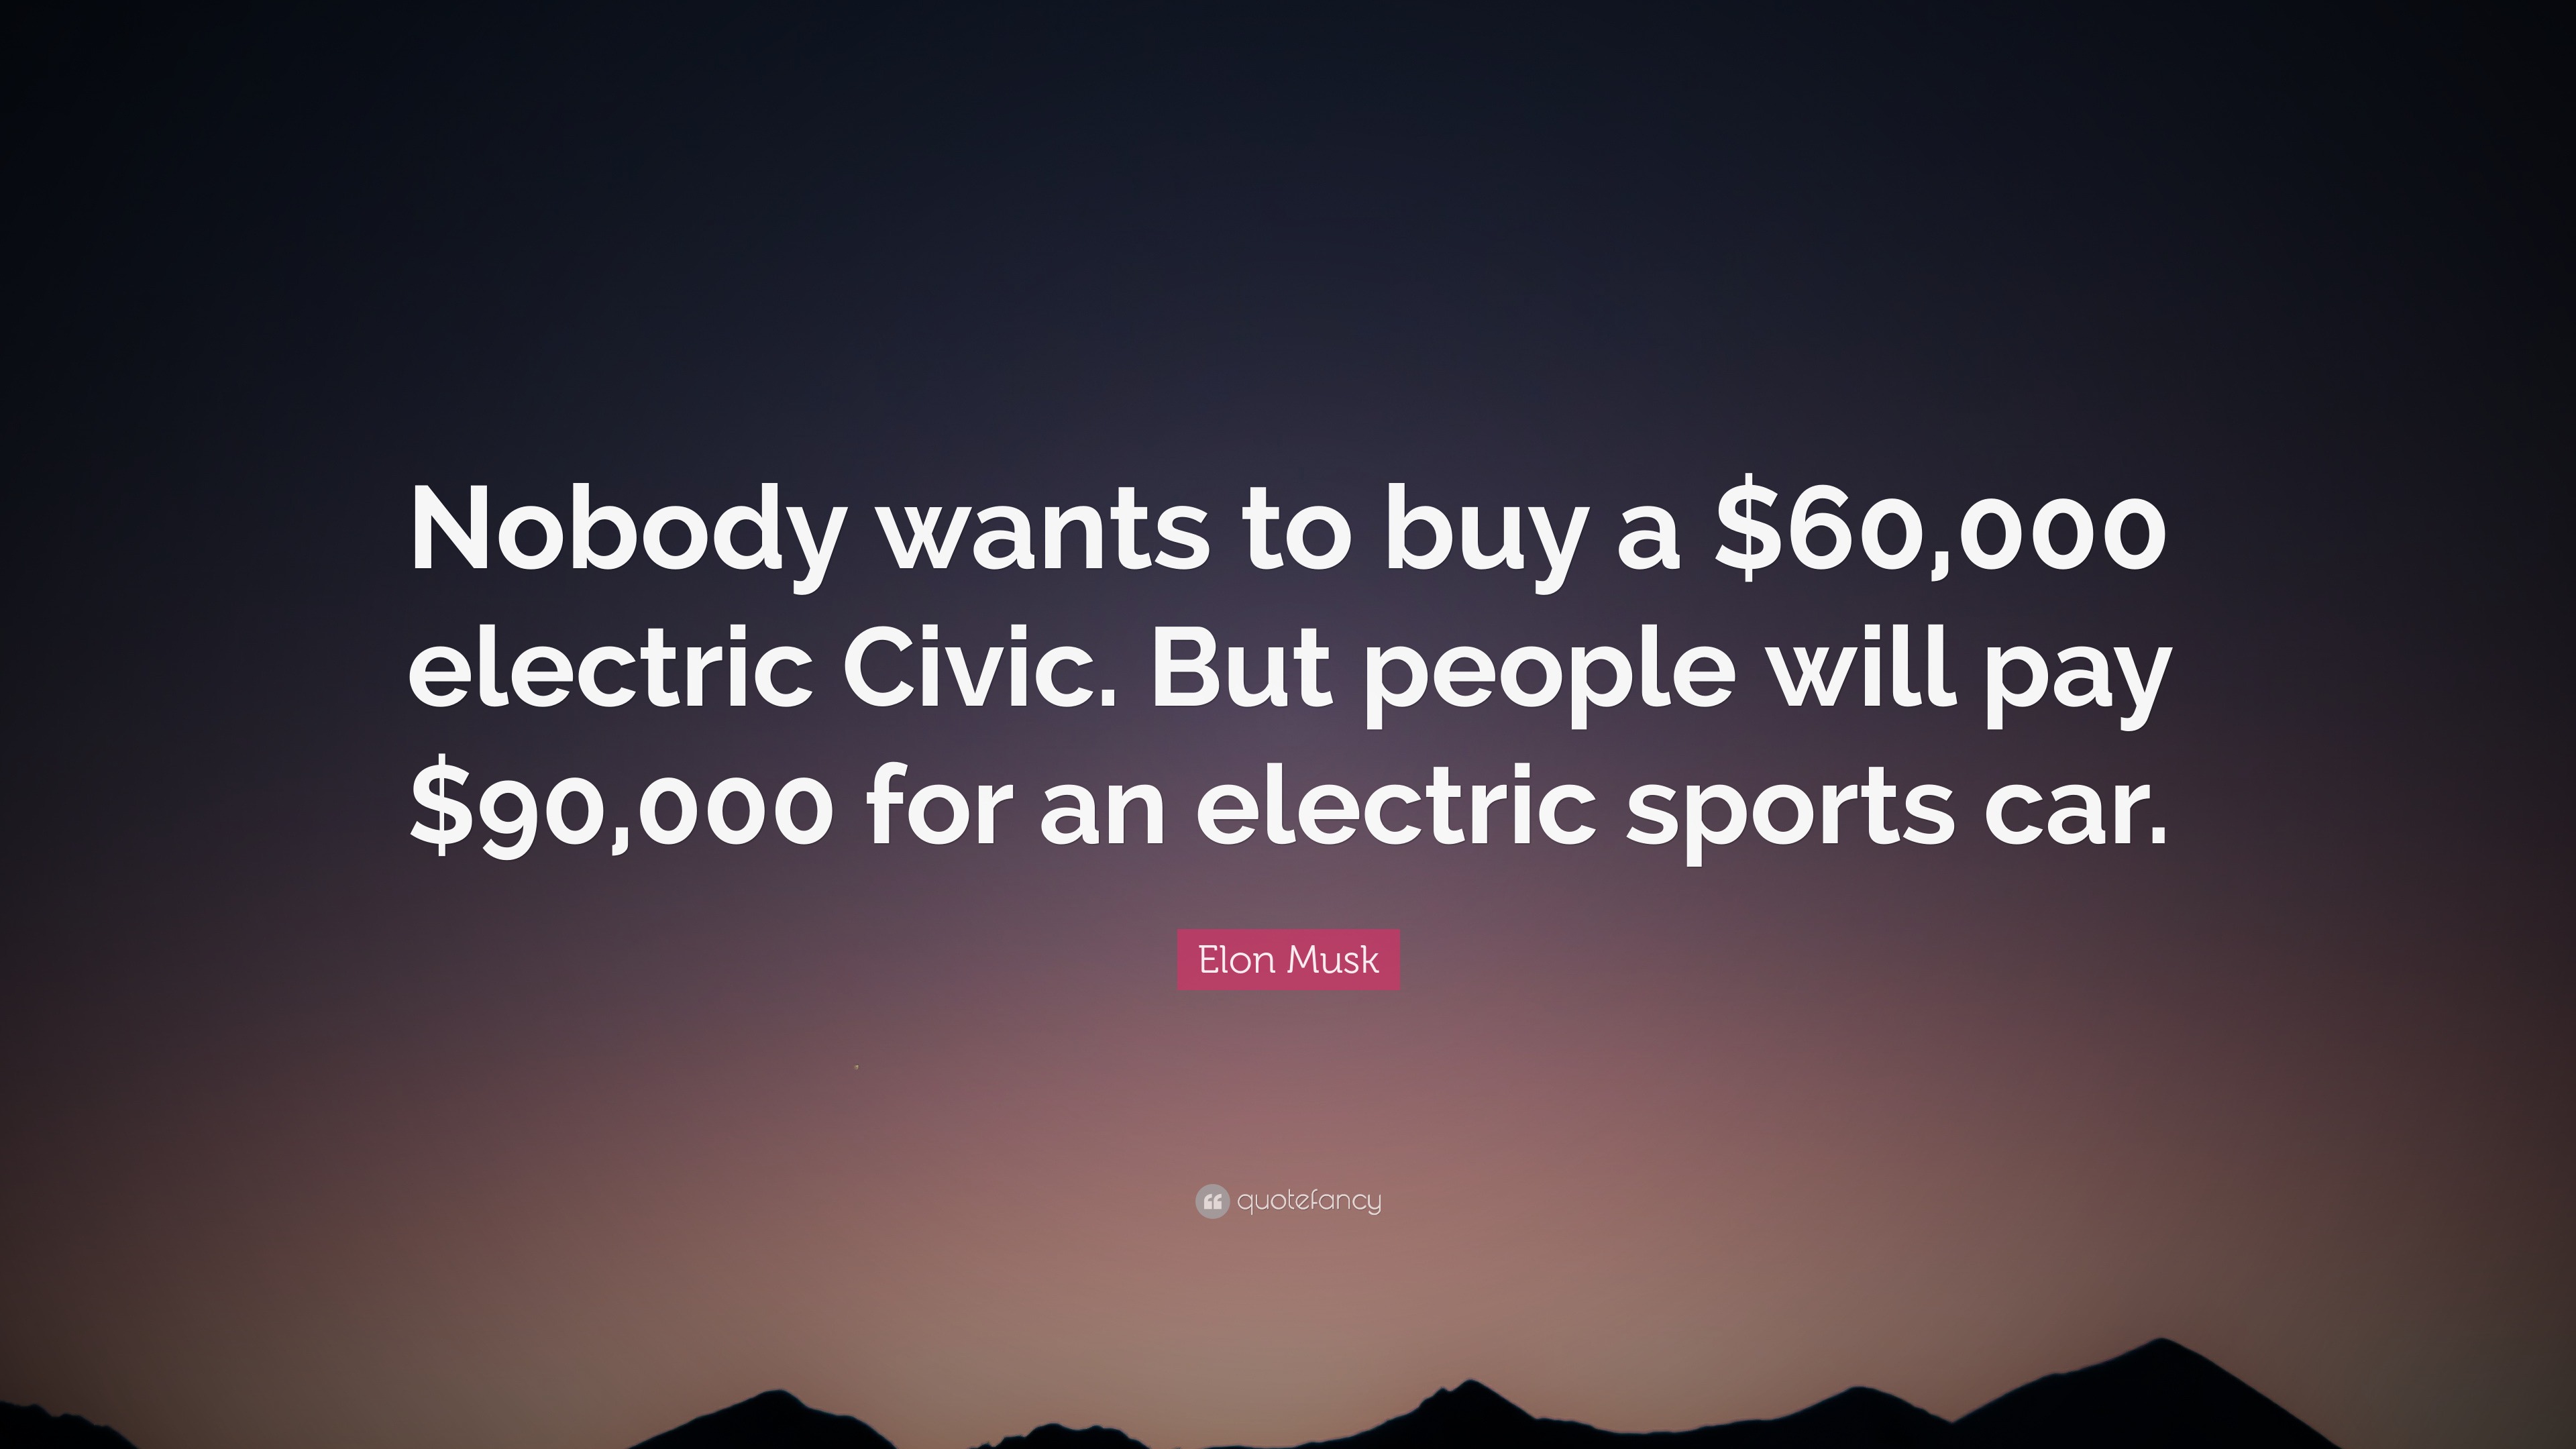 Elon Musk Quote “Nobody wants to buy a 60,000 electric Civic. But